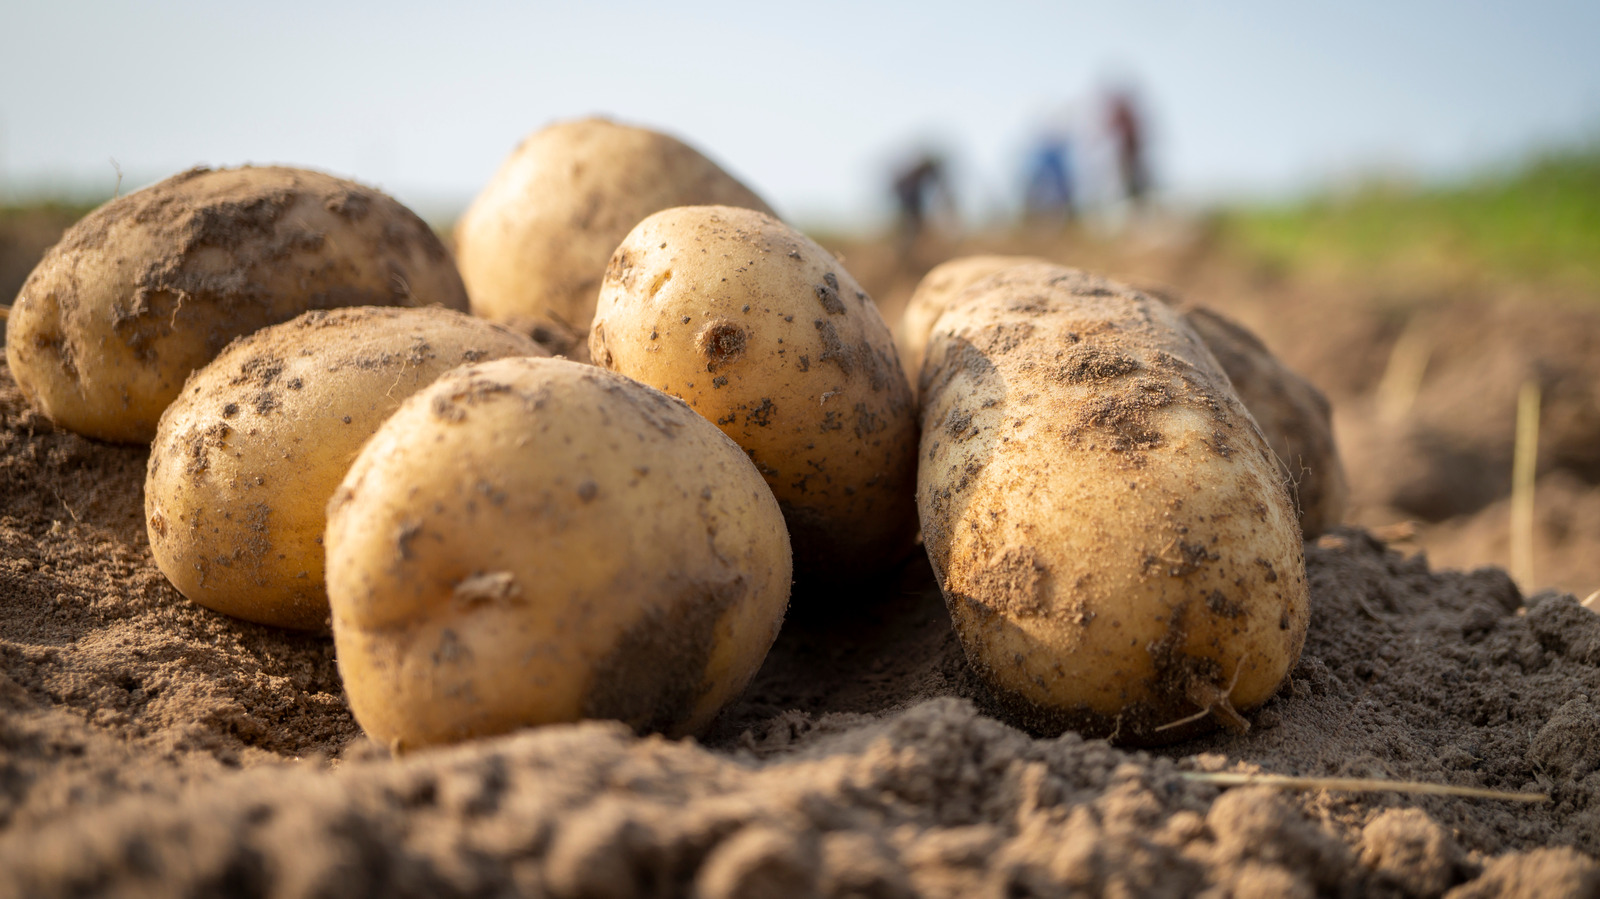 Which US State Produces The Most Potatoes?